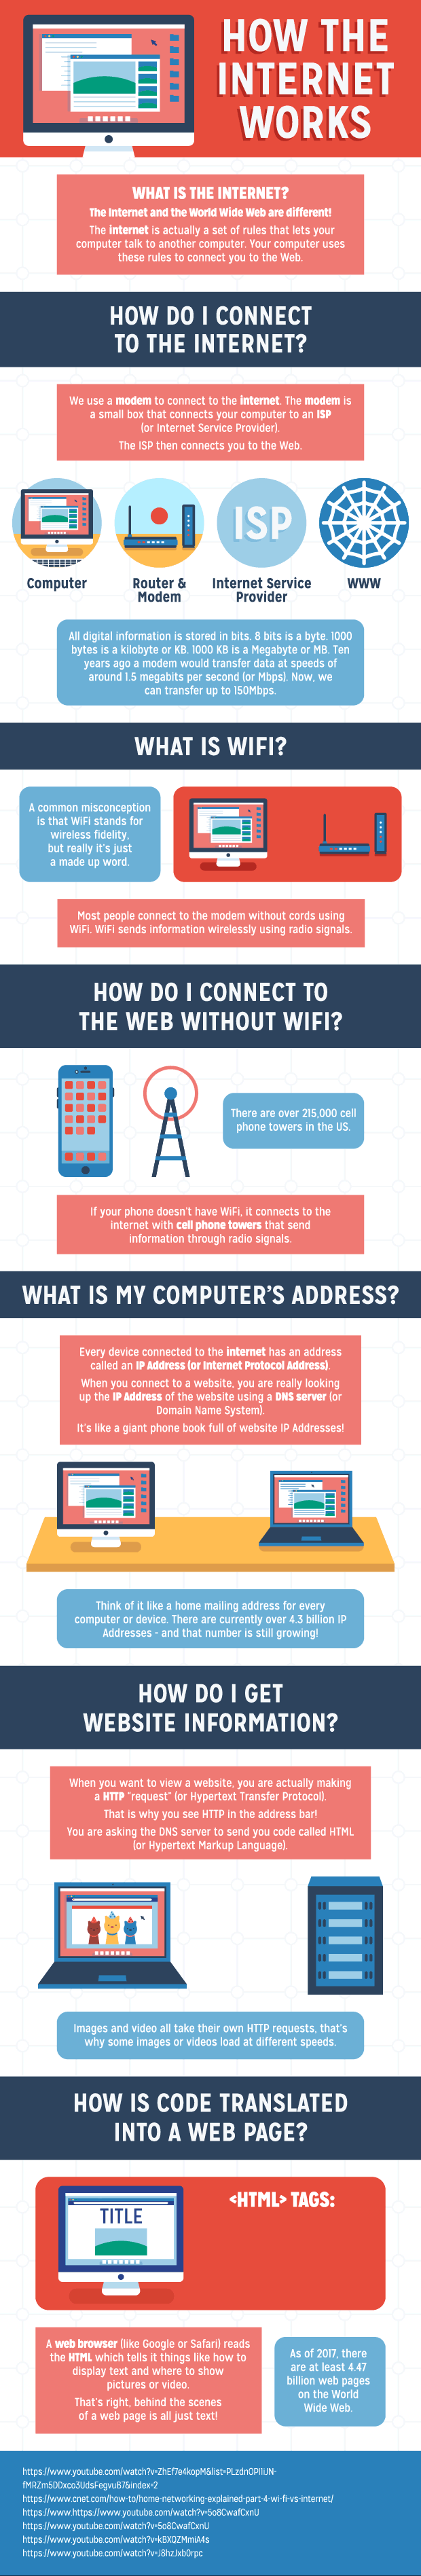 How Does The Internet Work? - #infographic